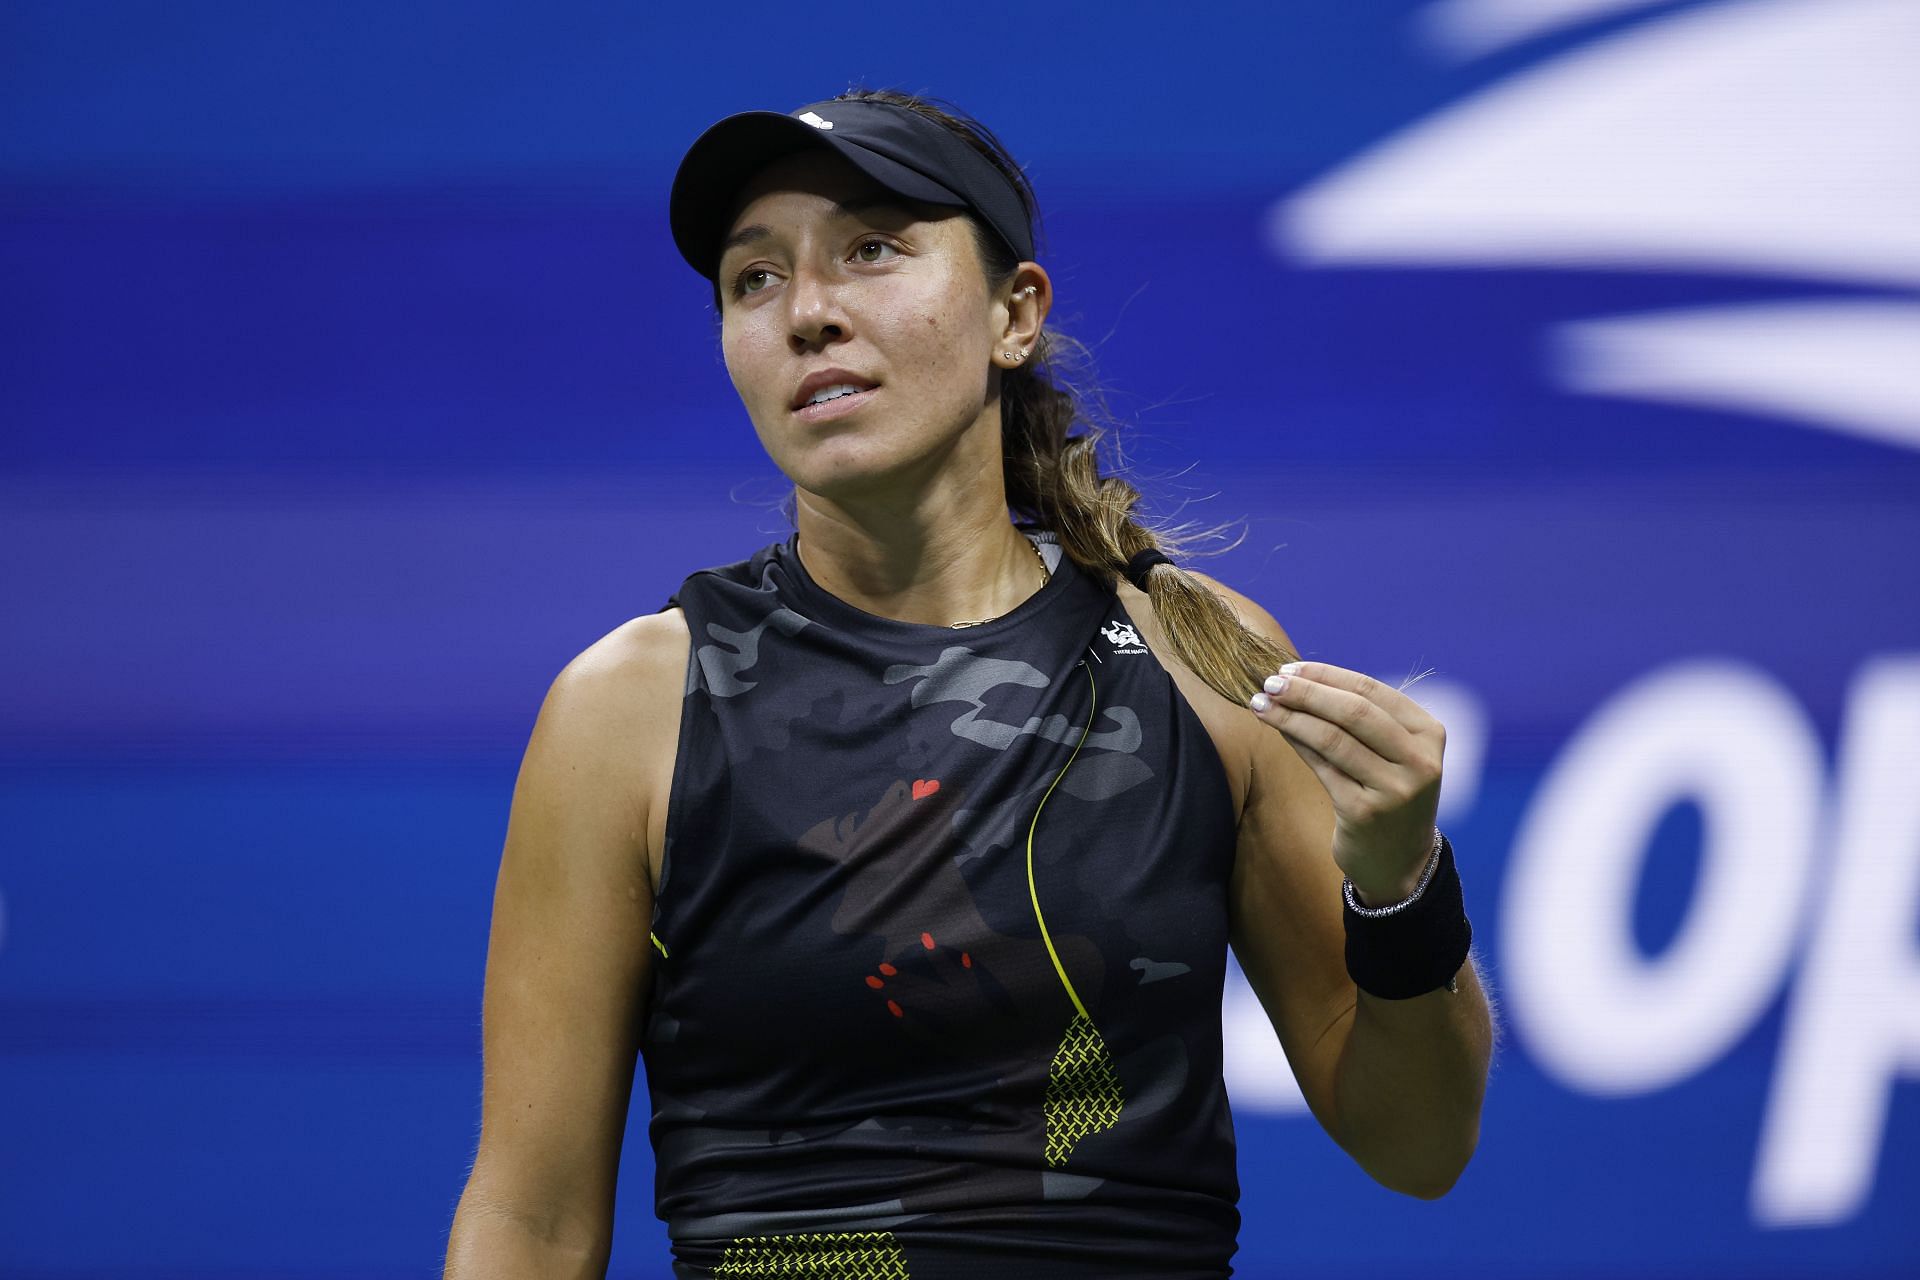 Pegula is among the favorites to win the San Diego Open